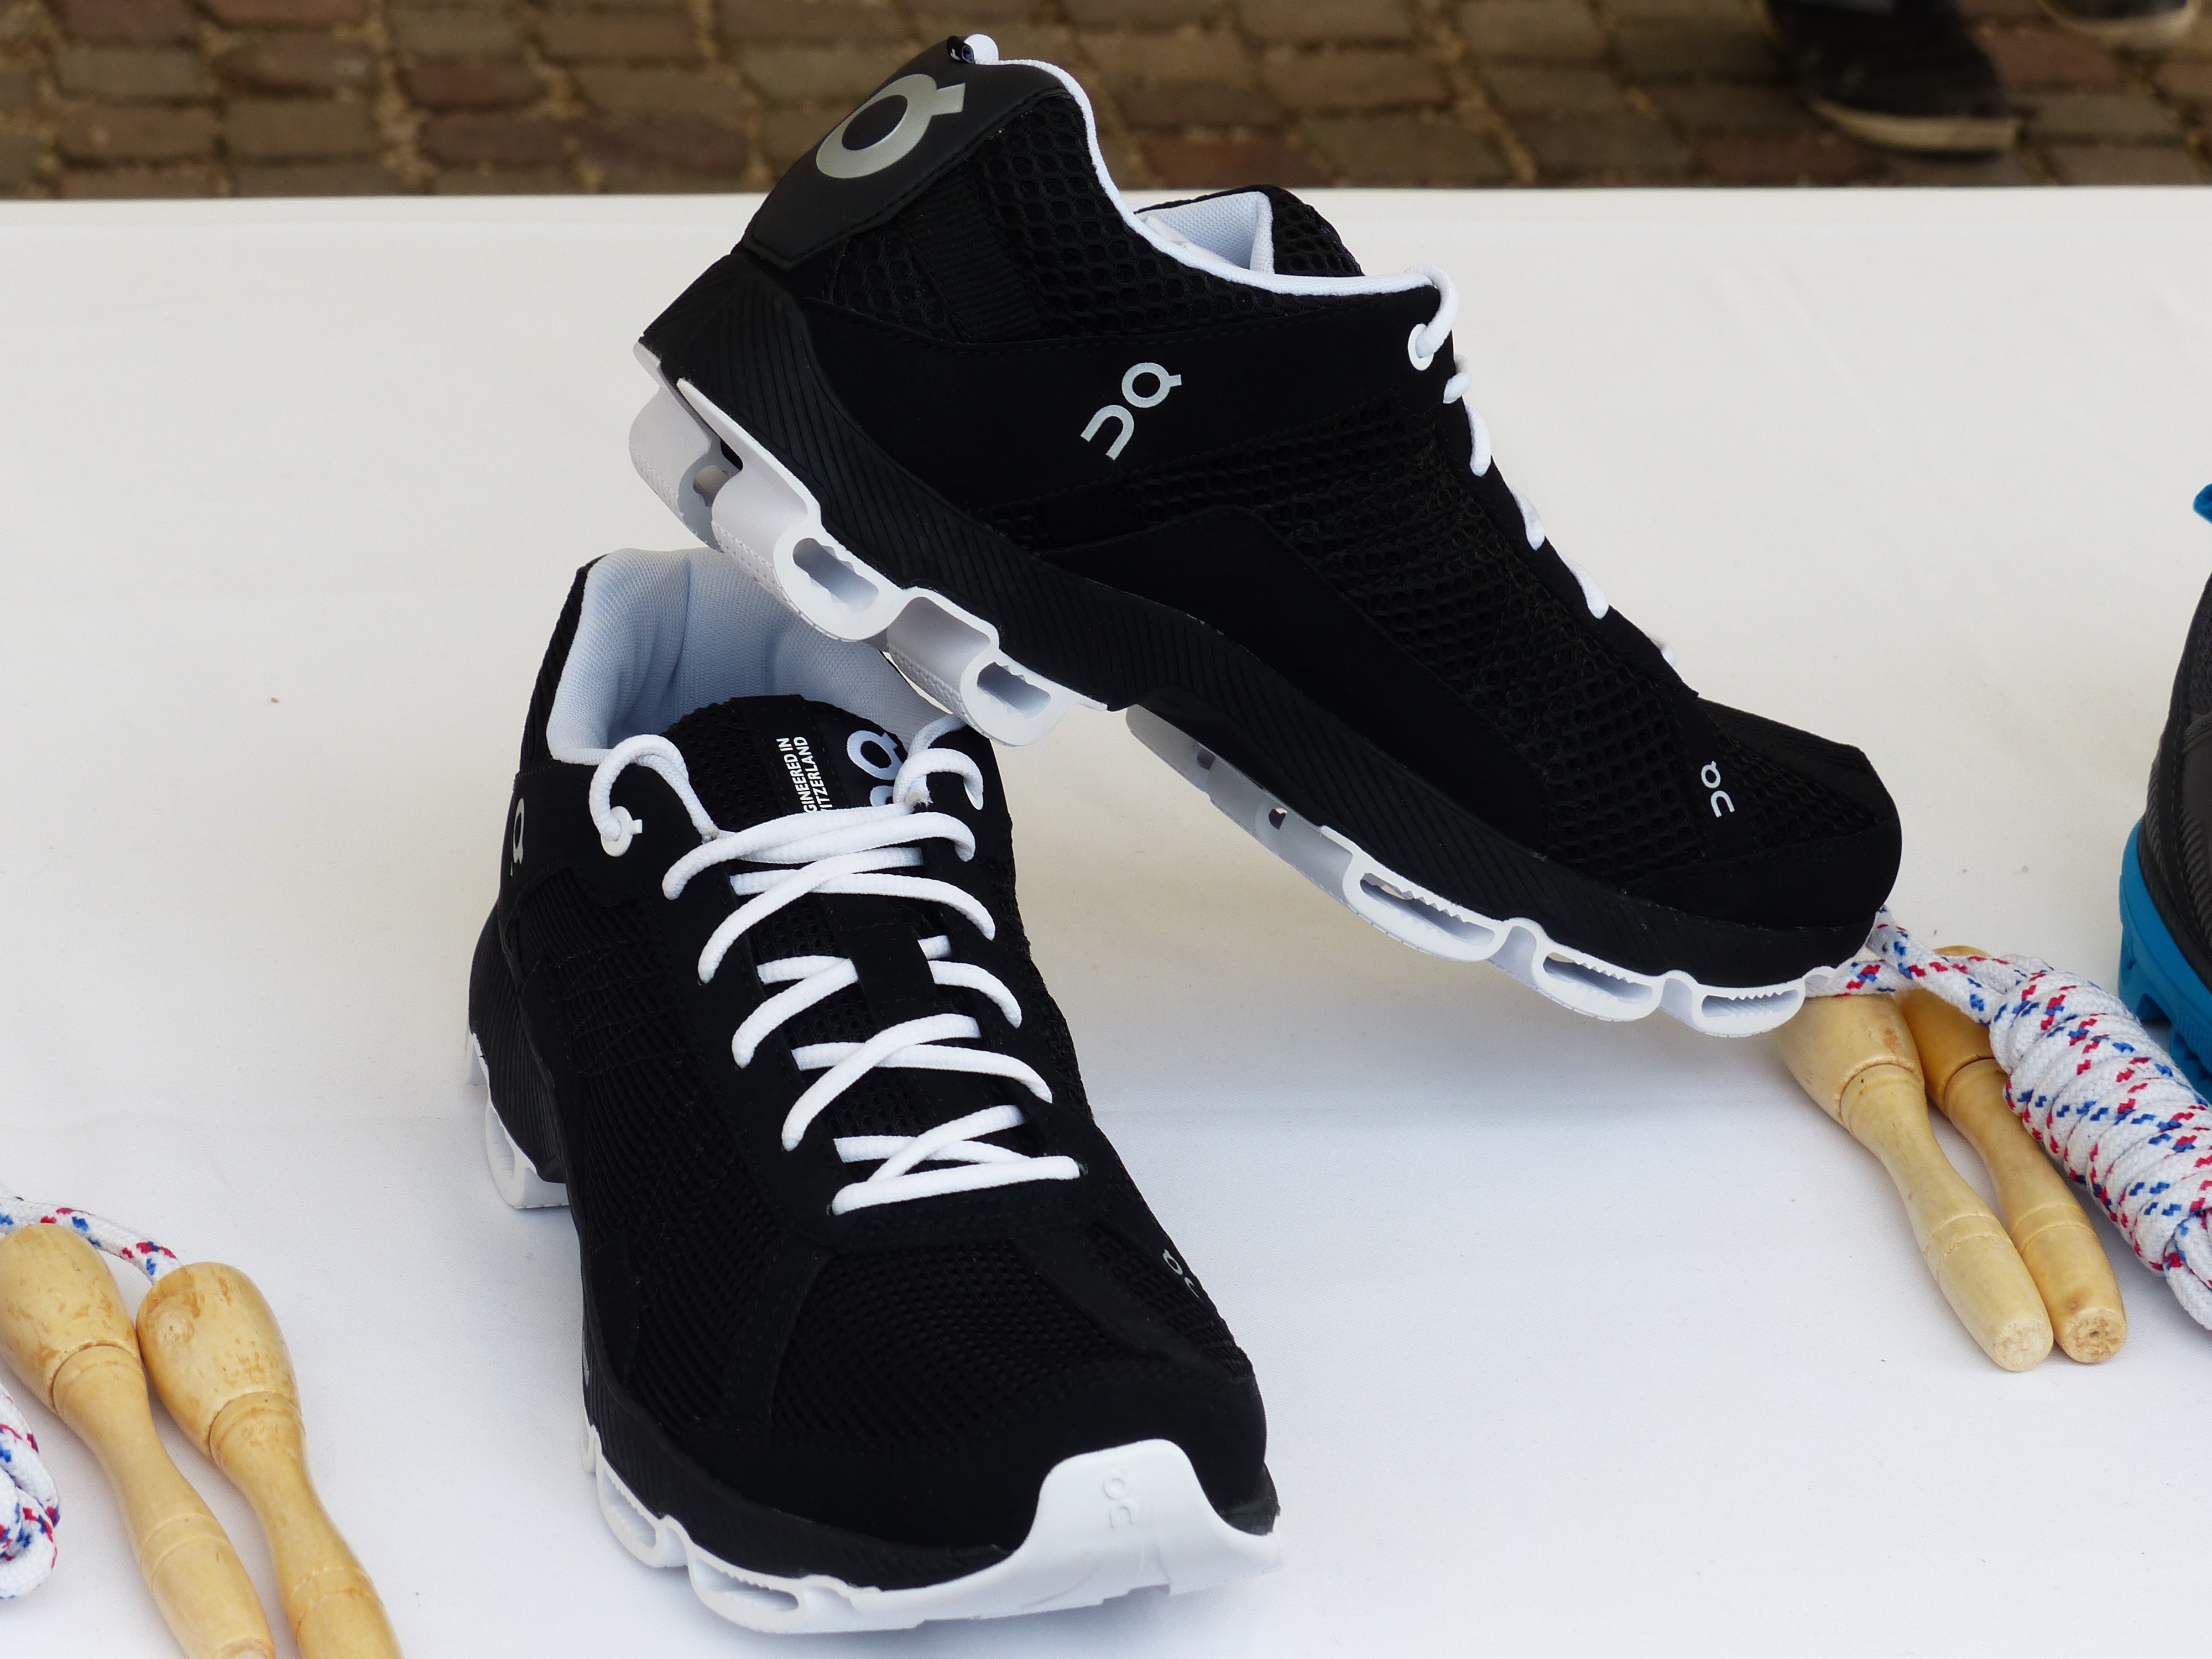 black-and-white athletic shoes